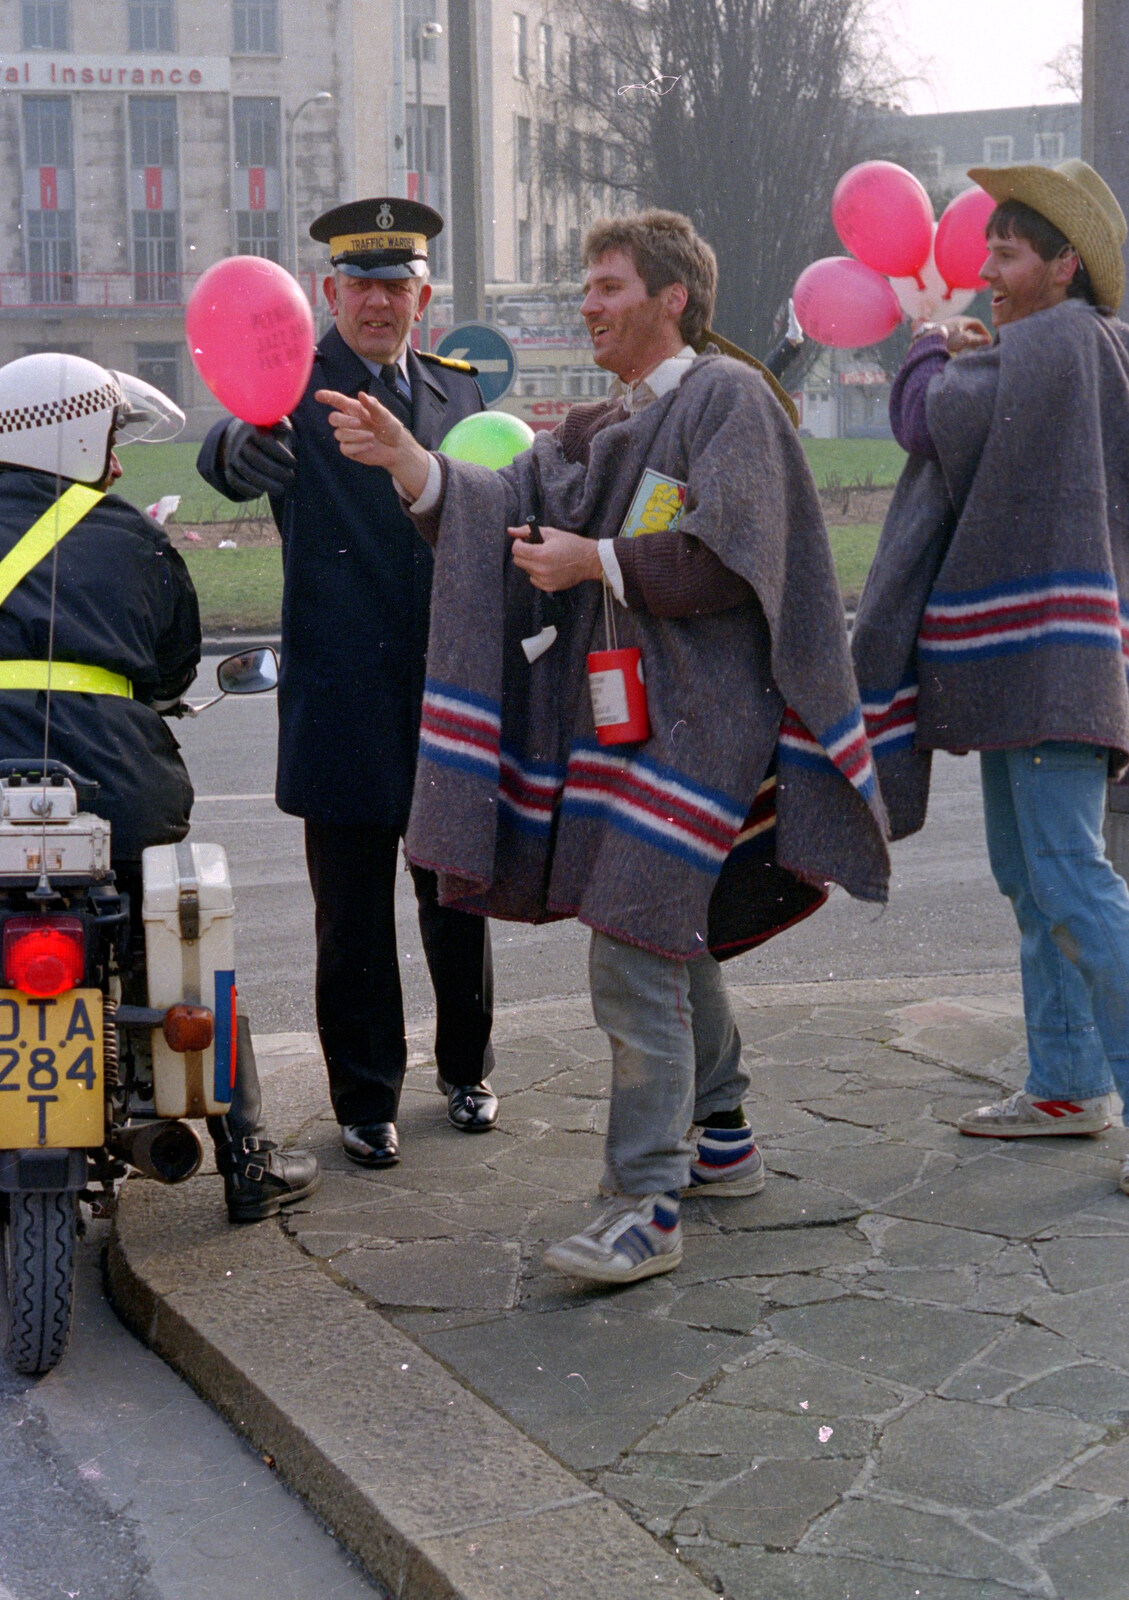 A traffic warden gets involved in St. Andrew's Cross from Uni: PPSU "Jazz" RAG Street Parade, Plymouth, Devon - 17th February 1986